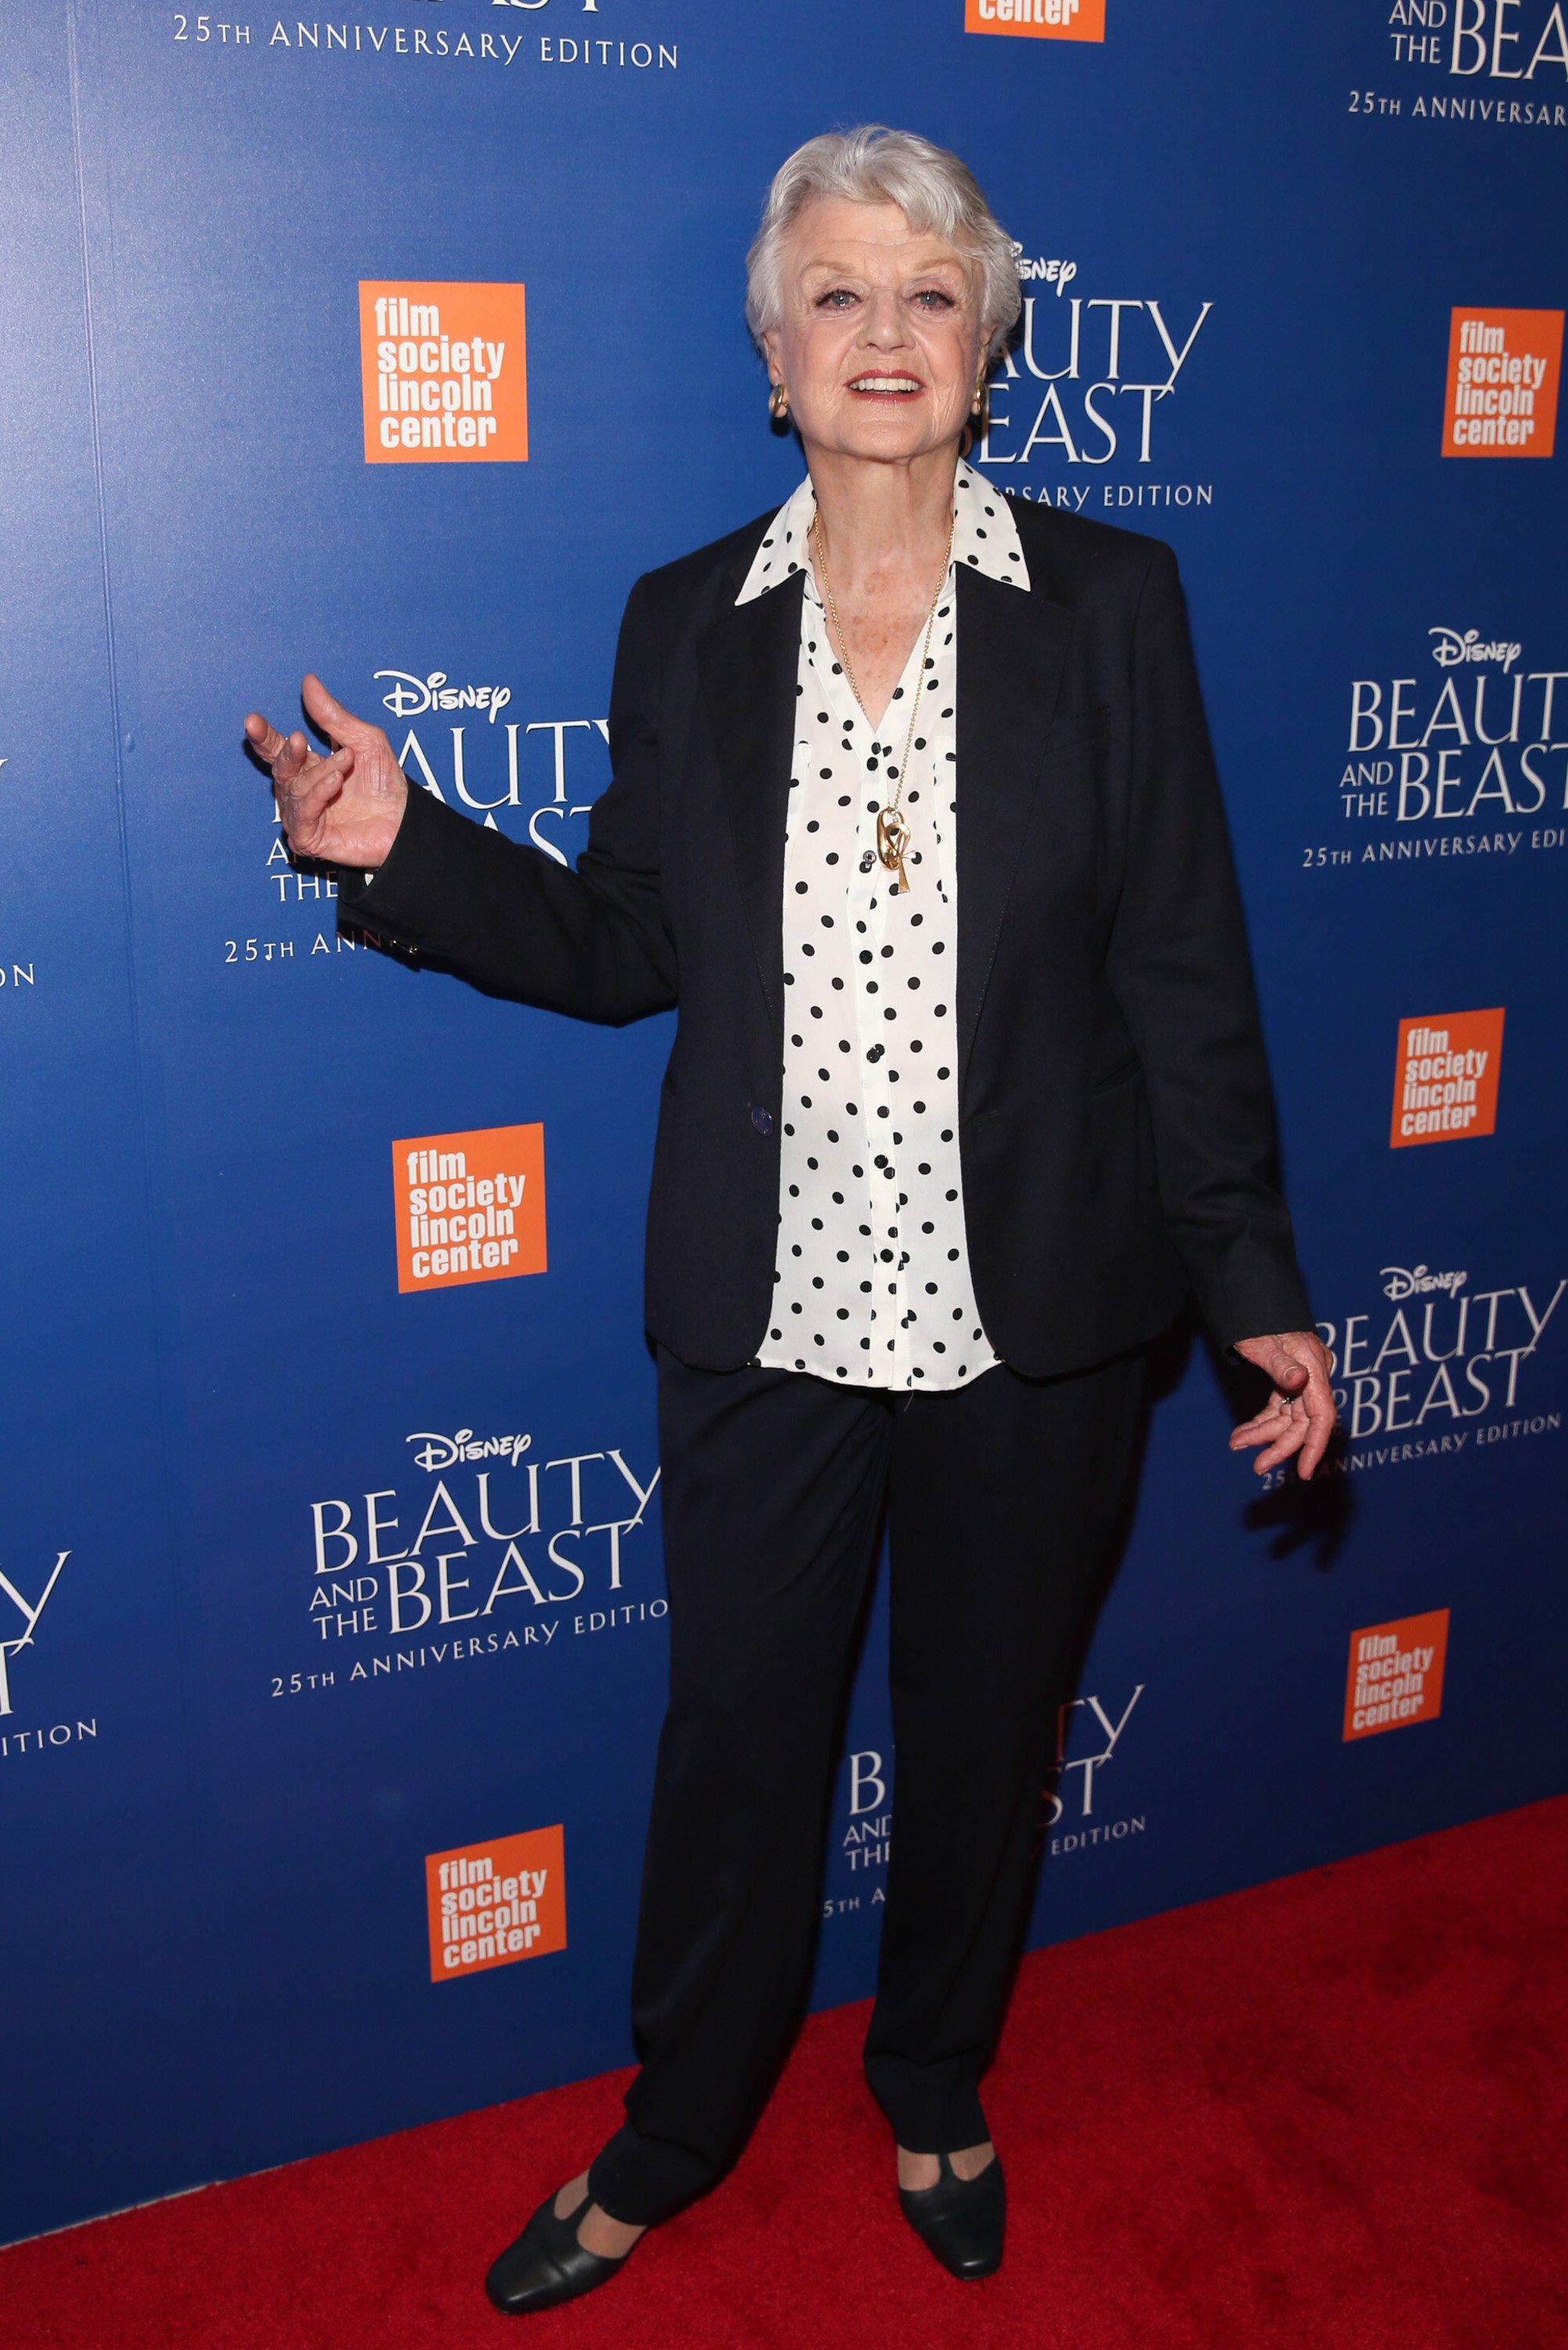 Angela Lansbury attends the "Beauty & The Beast" 25th Anniversary Screening at Alice Tully Hall, Lincoln Center on September 18, 2016 in New York City. | Source: Getty Images